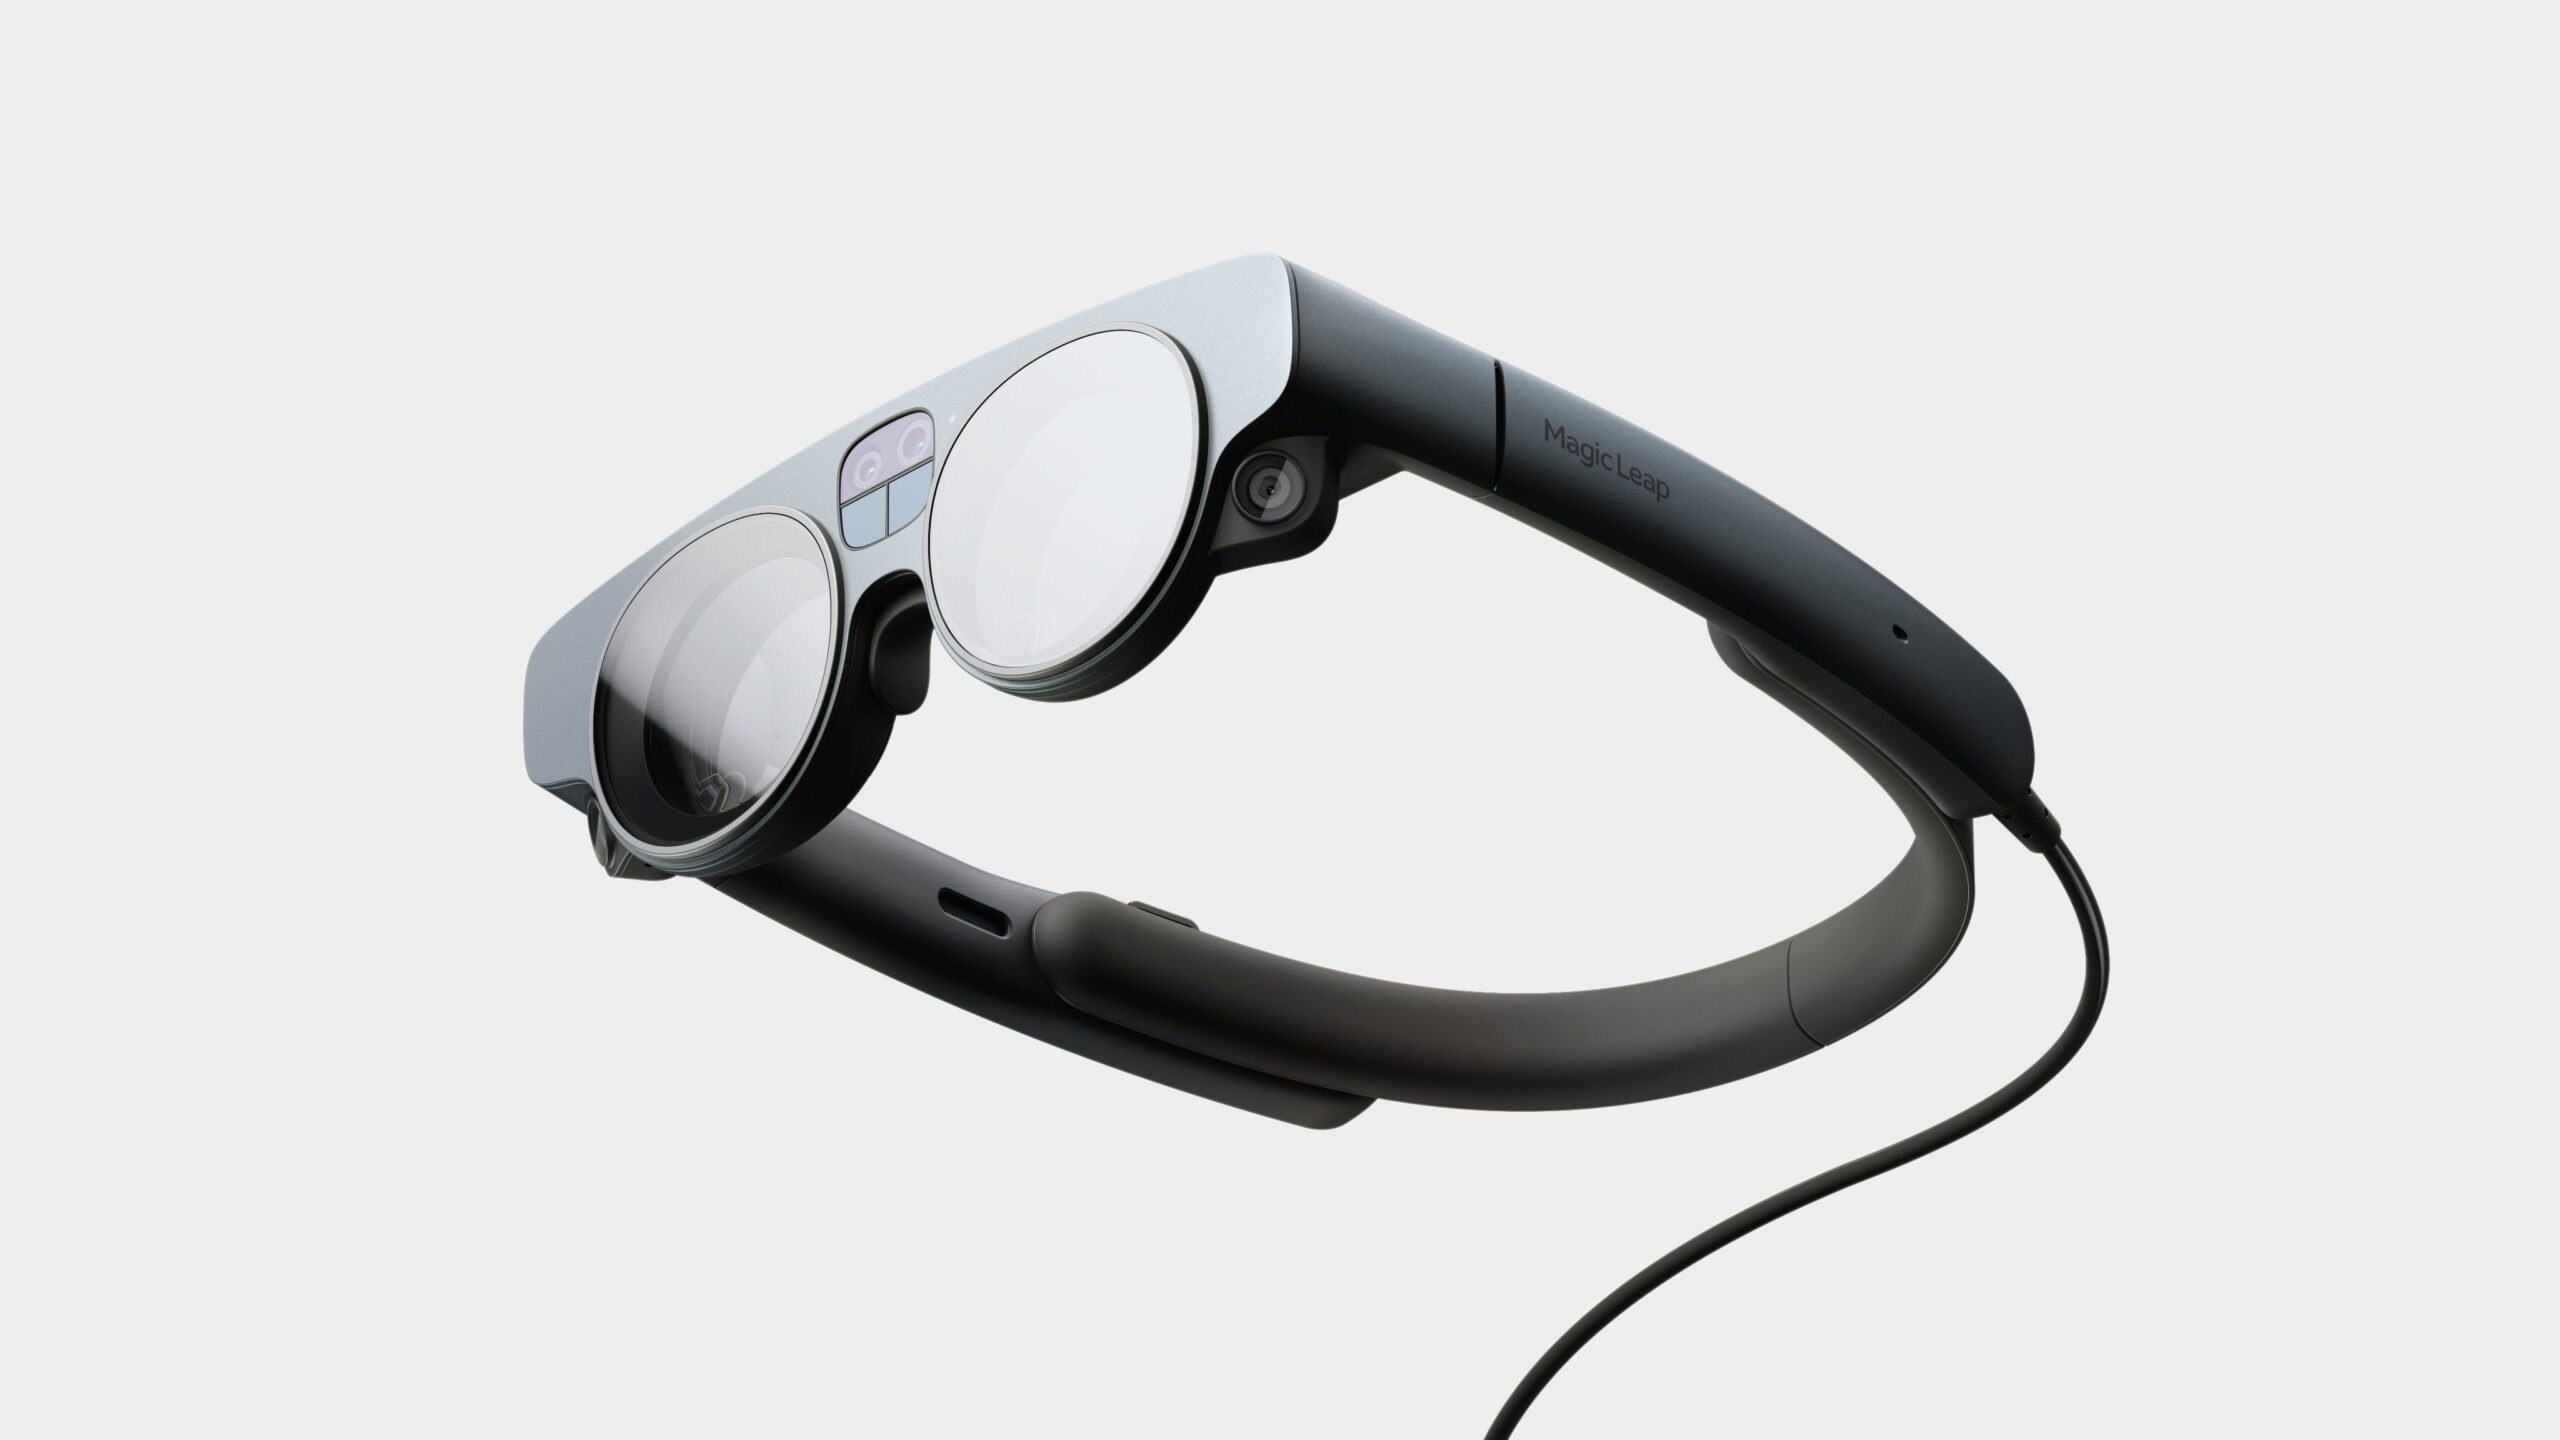 Magic Leap is coming up with the industry's smallest and lightest AR headset